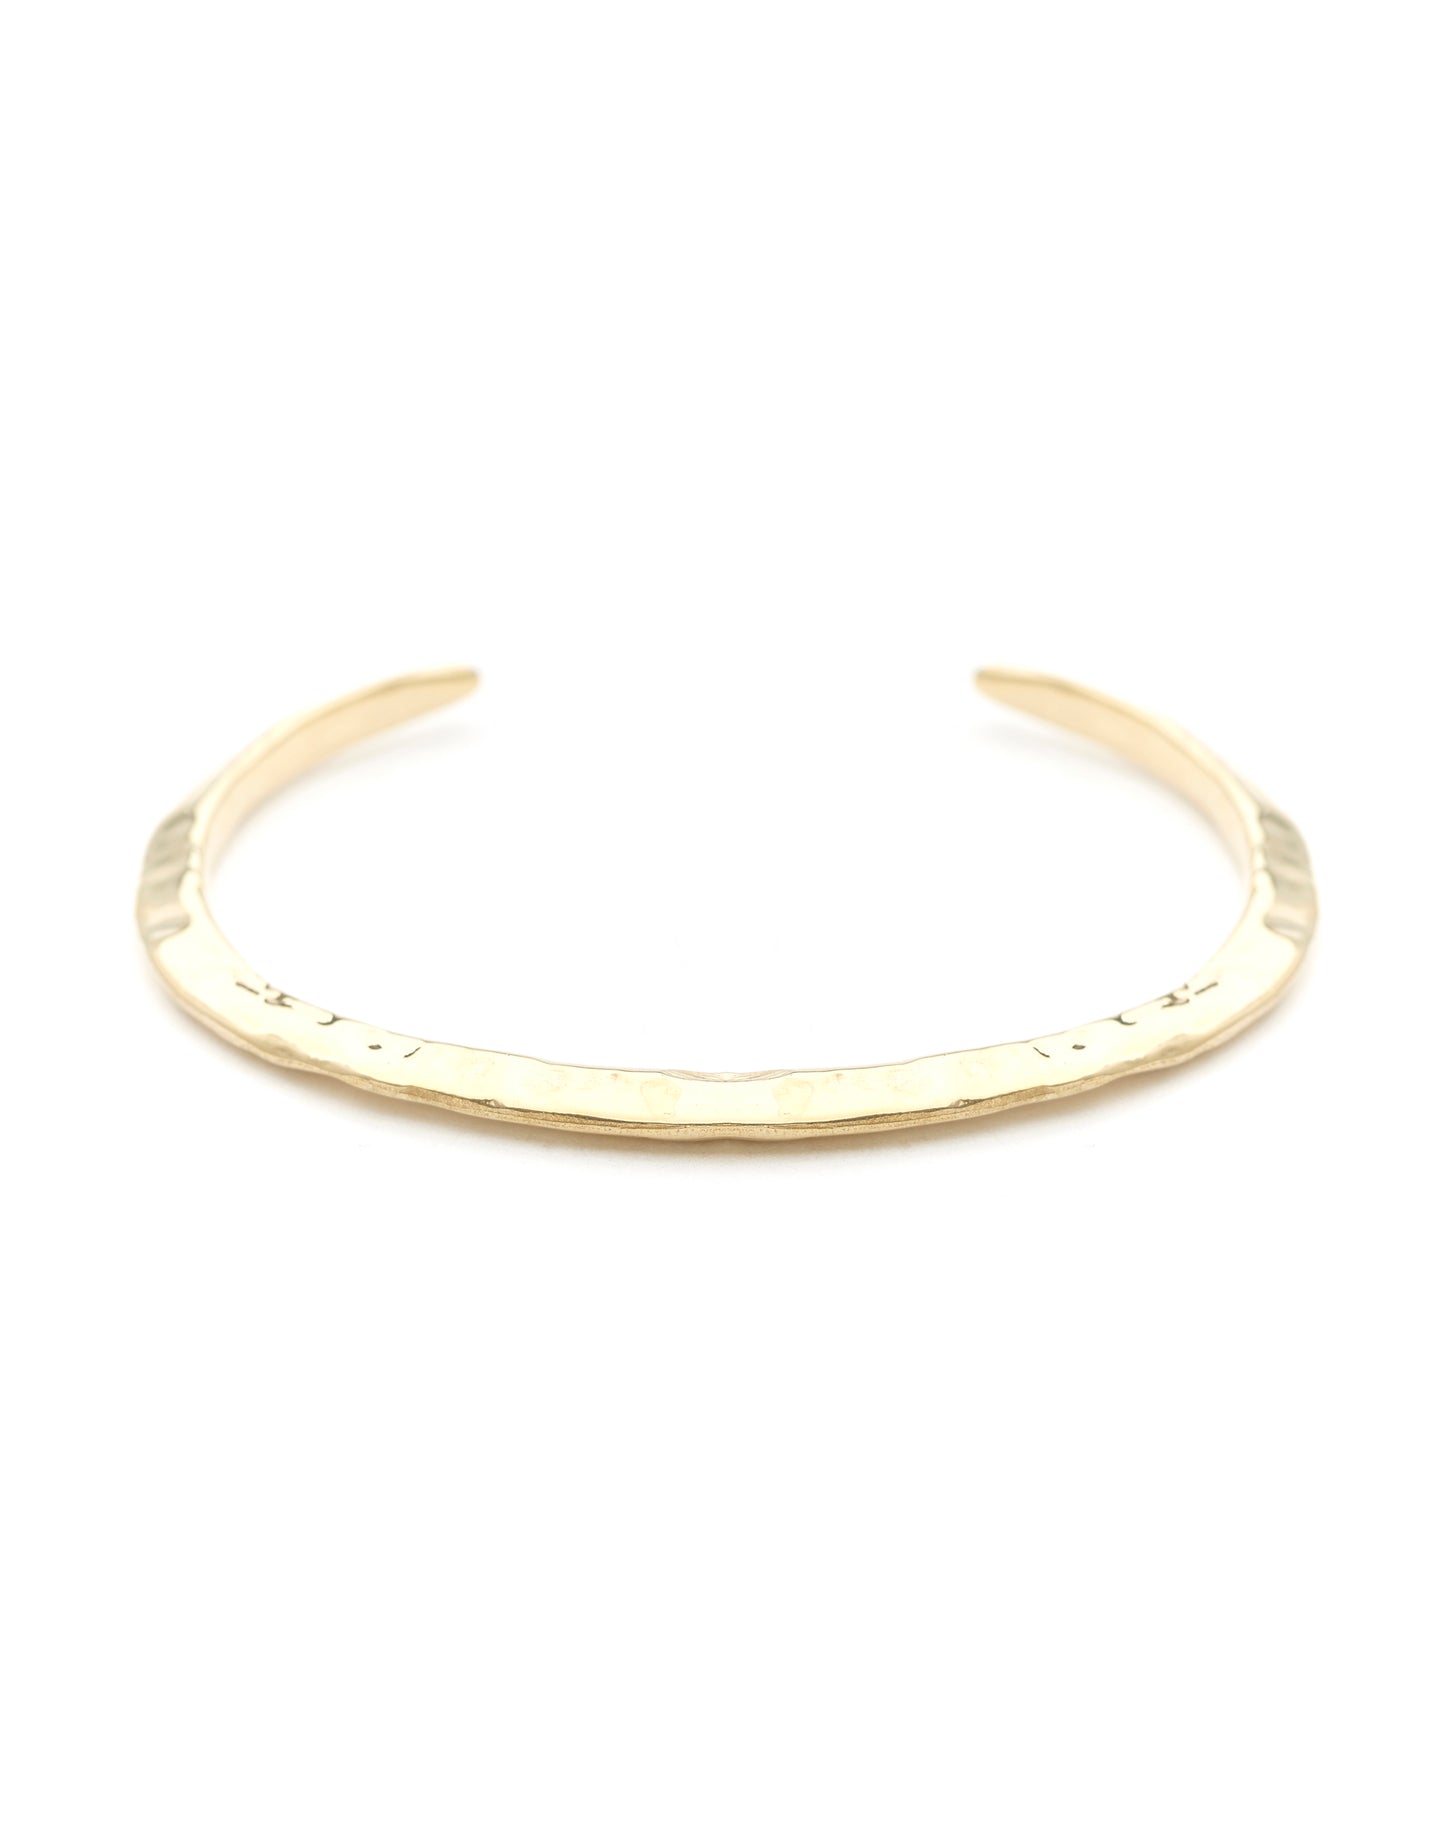 ODETTE NY Women's Sustainable Made in USA Jewelry Hammered Recycled Brass Bangle Cuff with Open Fit Design